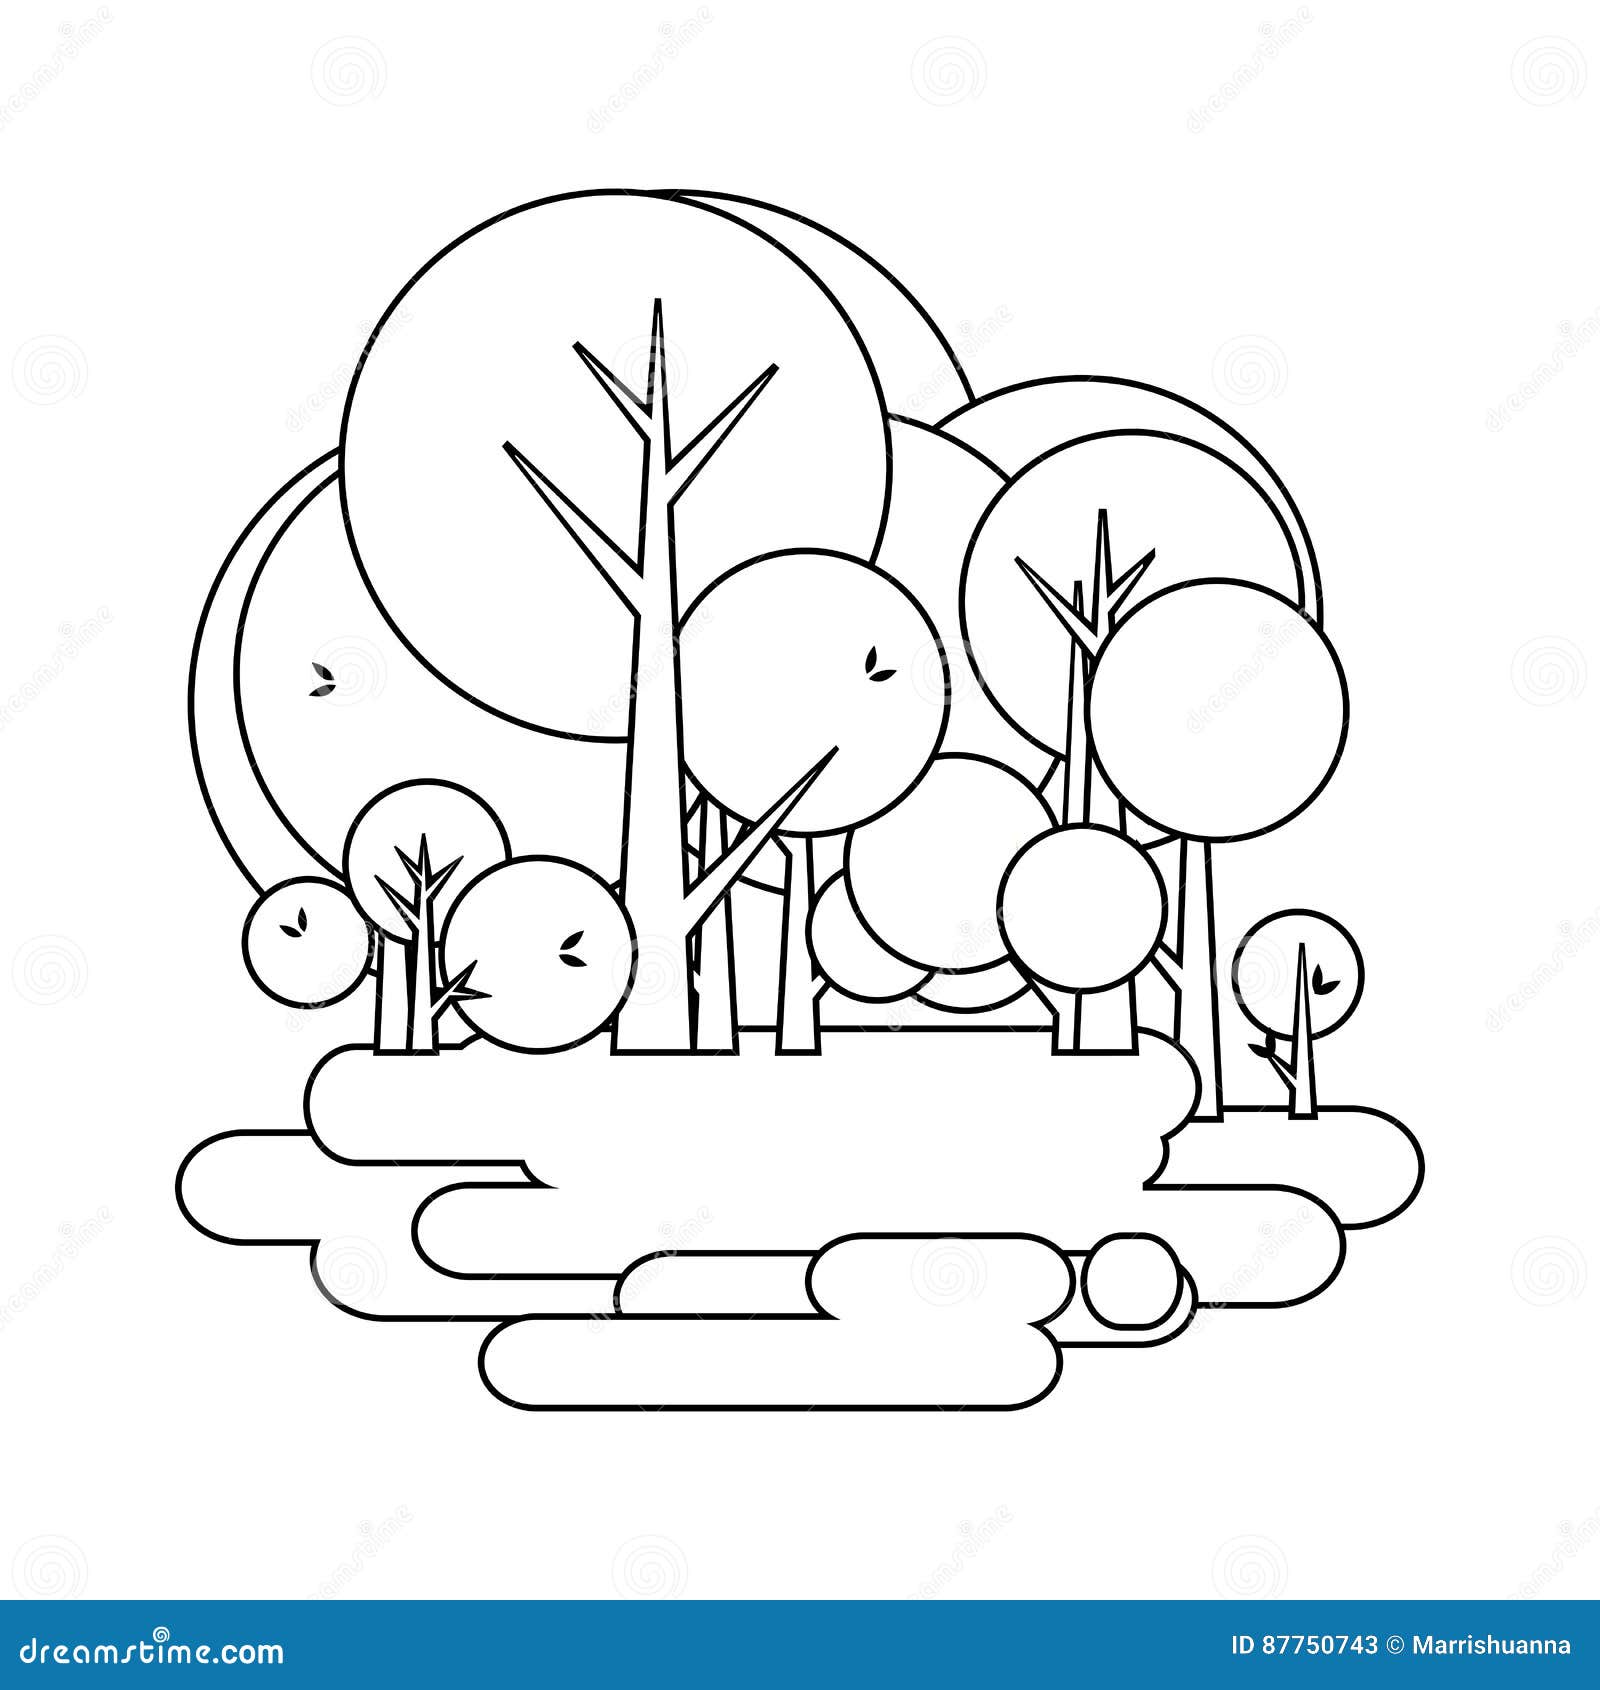 Nature of the environment stock vector. Illustration of graphic - 87750743